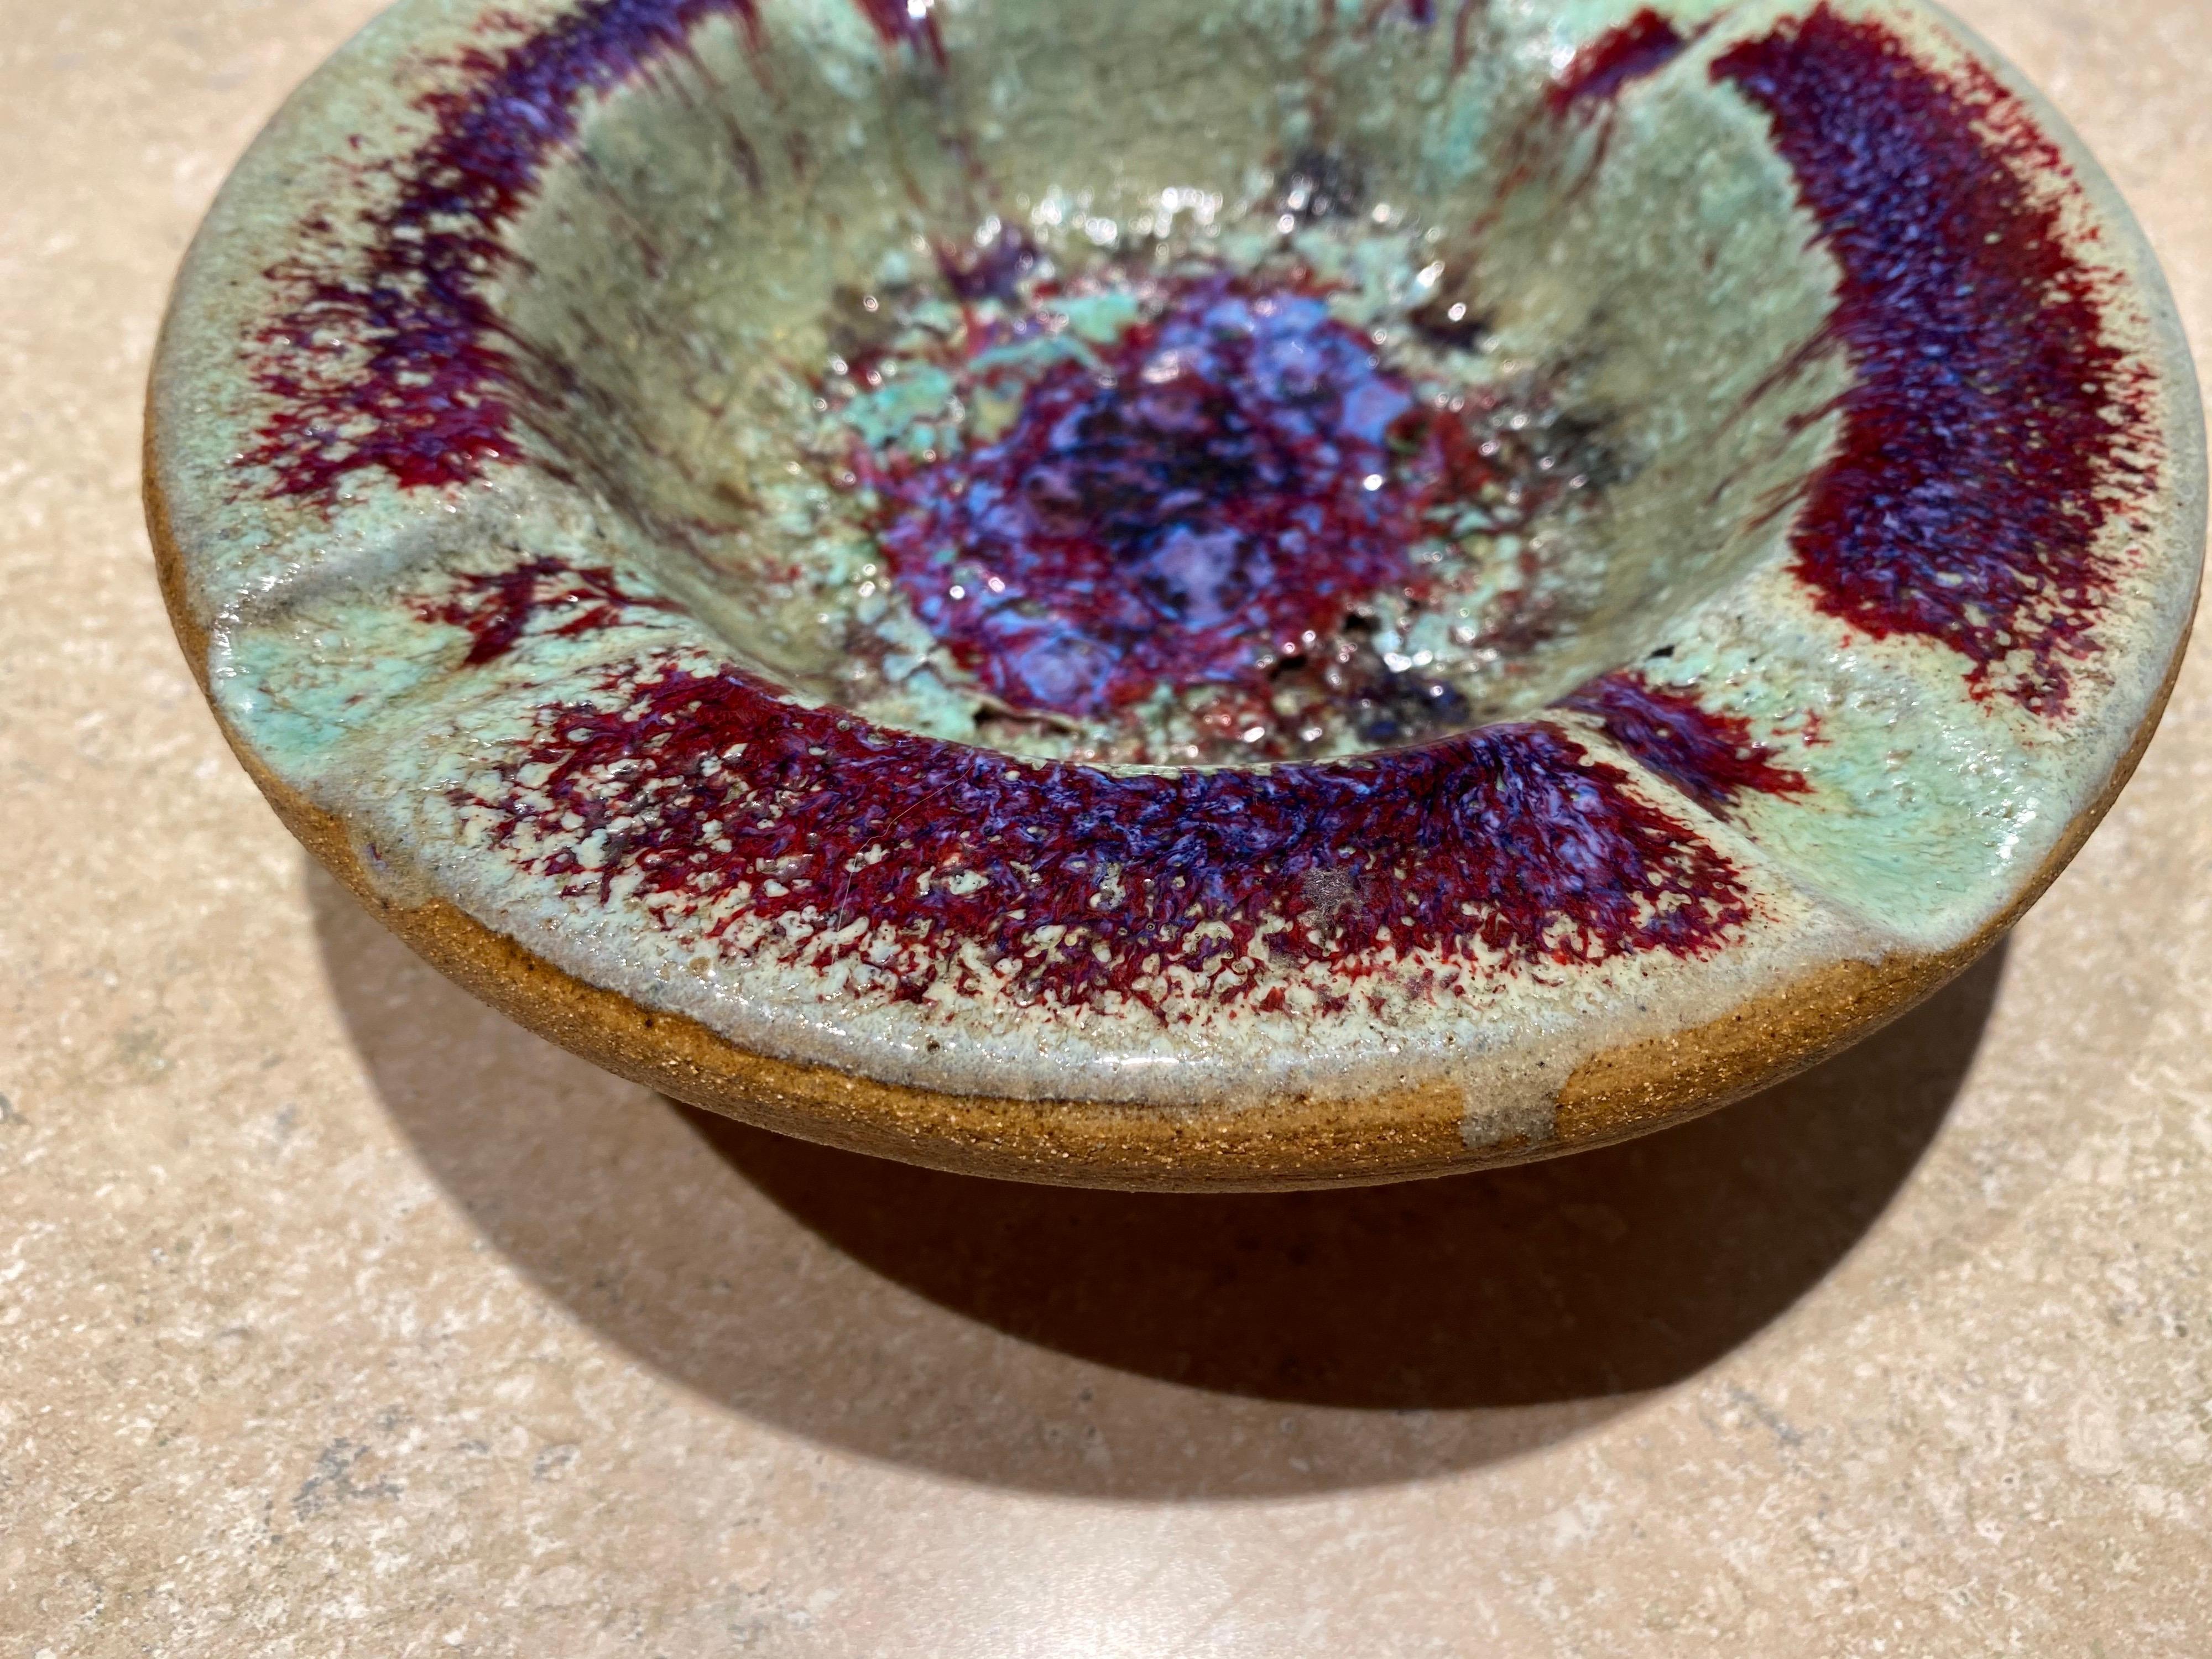 Vintage ceramic ashtray / bowl by Texas ceramist Harding Black features a beautiful chun glaze. This sculptural piece is in great condition.